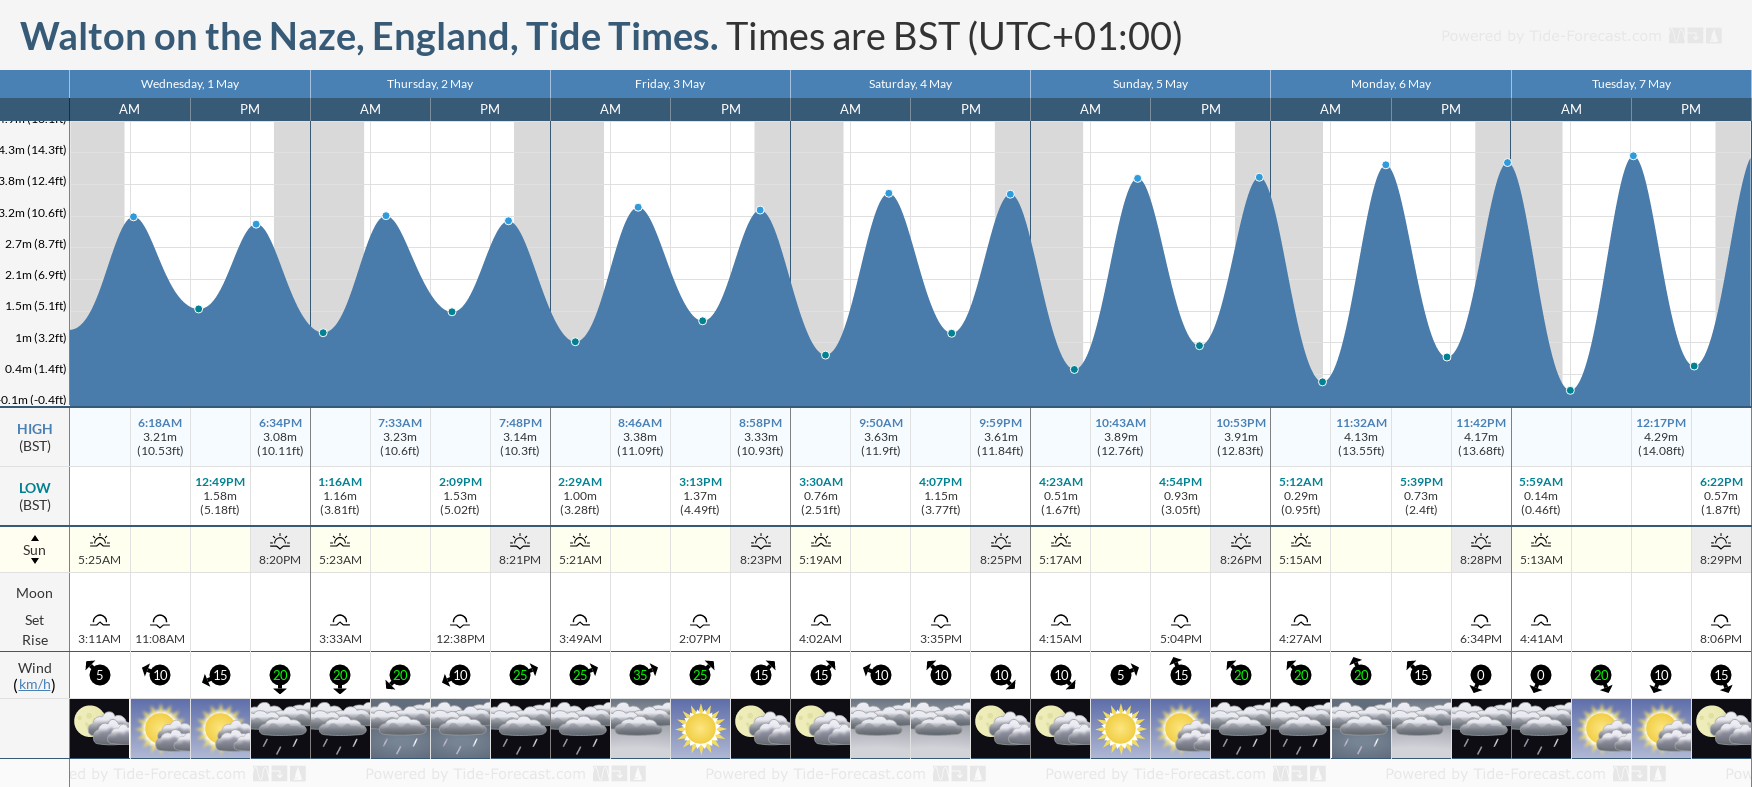 Walton on the Naze, England Tide Chart including high and low tide tide times for the next 7 days